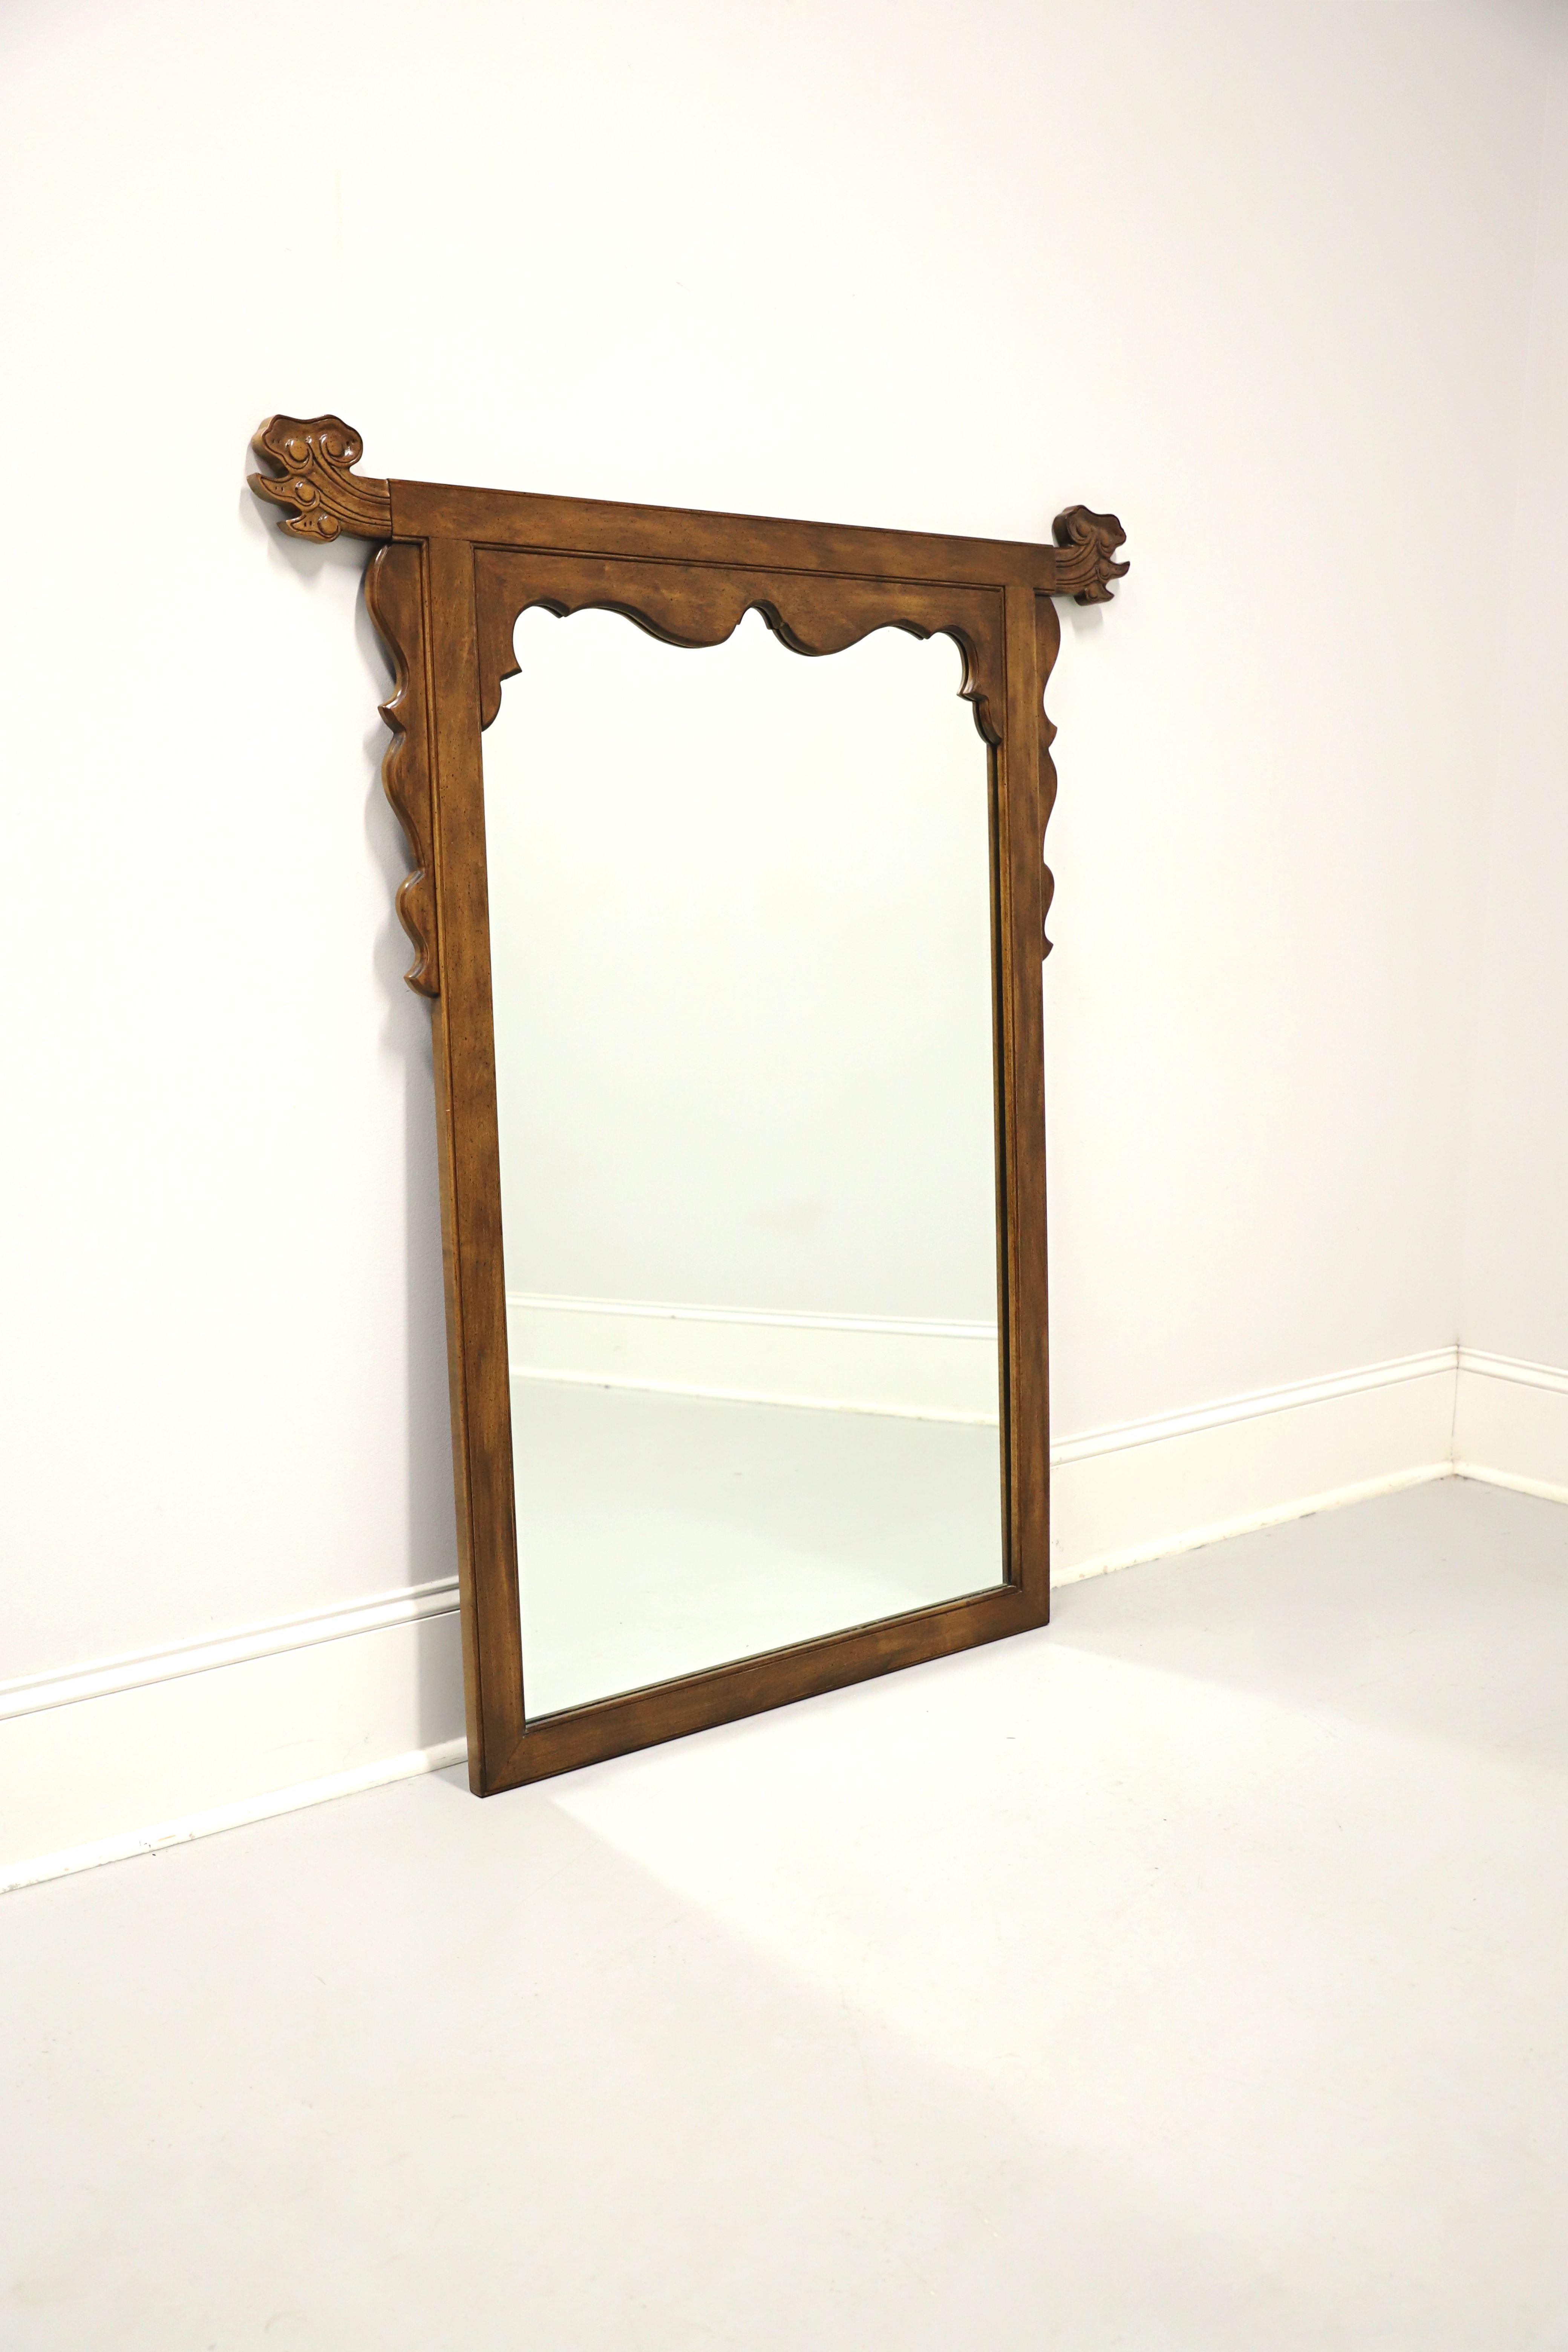 An Asian influenced dresser or wall mirror by top-quality furniture maker Century Furniture, from their 